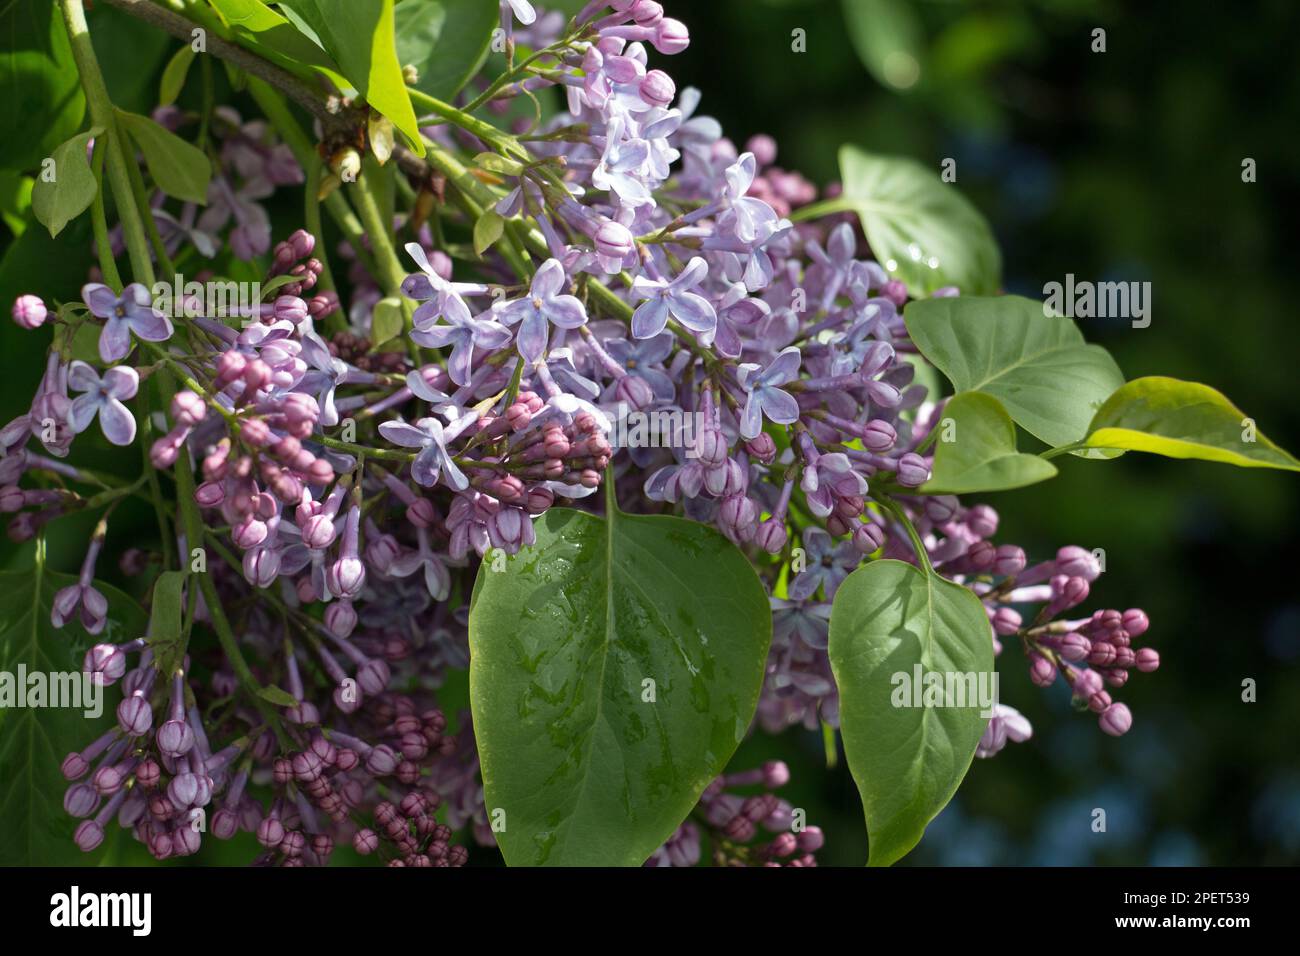 Clusters of purple flowers of the lilac tree shrub, Syringa vulgaris, blooming in late spring, close-up on a natural green leaf background Stock Photo